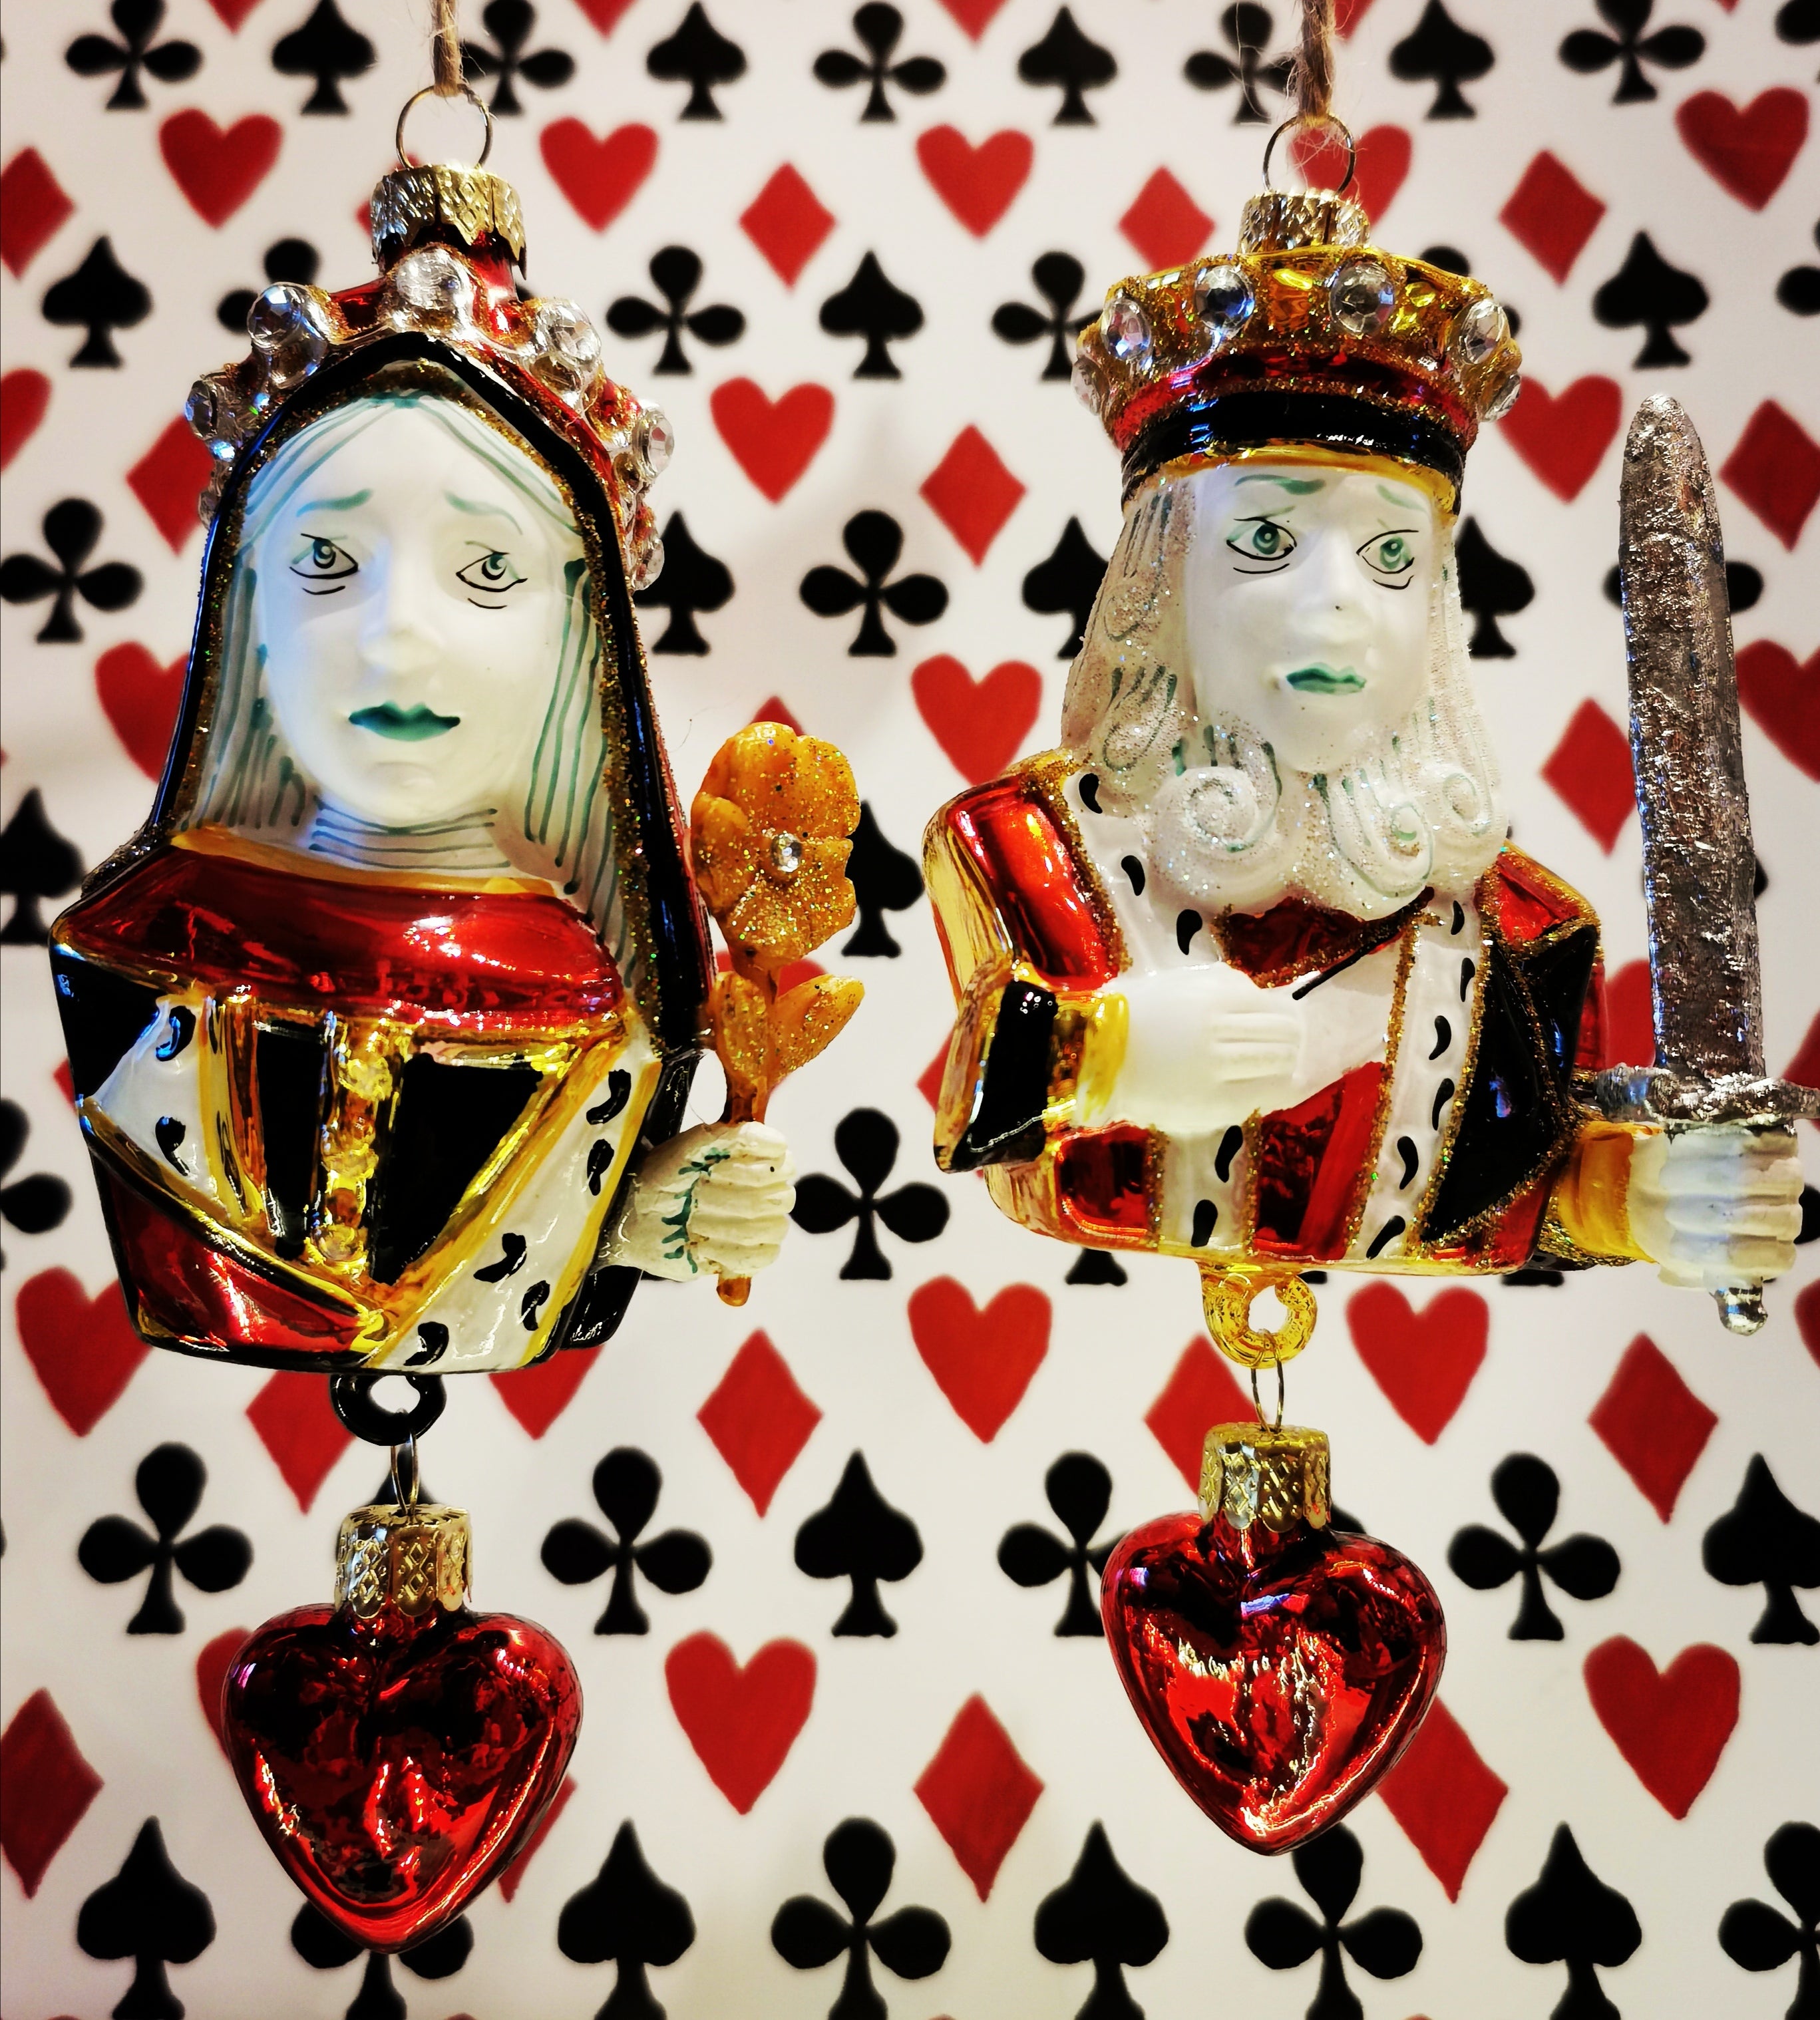 Feel the love with the King and Queen of hearts, gorgeous handpainted, hand decorated playing card inspired glass baubles from America, where these beauties are given as gifts throughout the year.

Approx 13cm high x 7cm x 5cm

